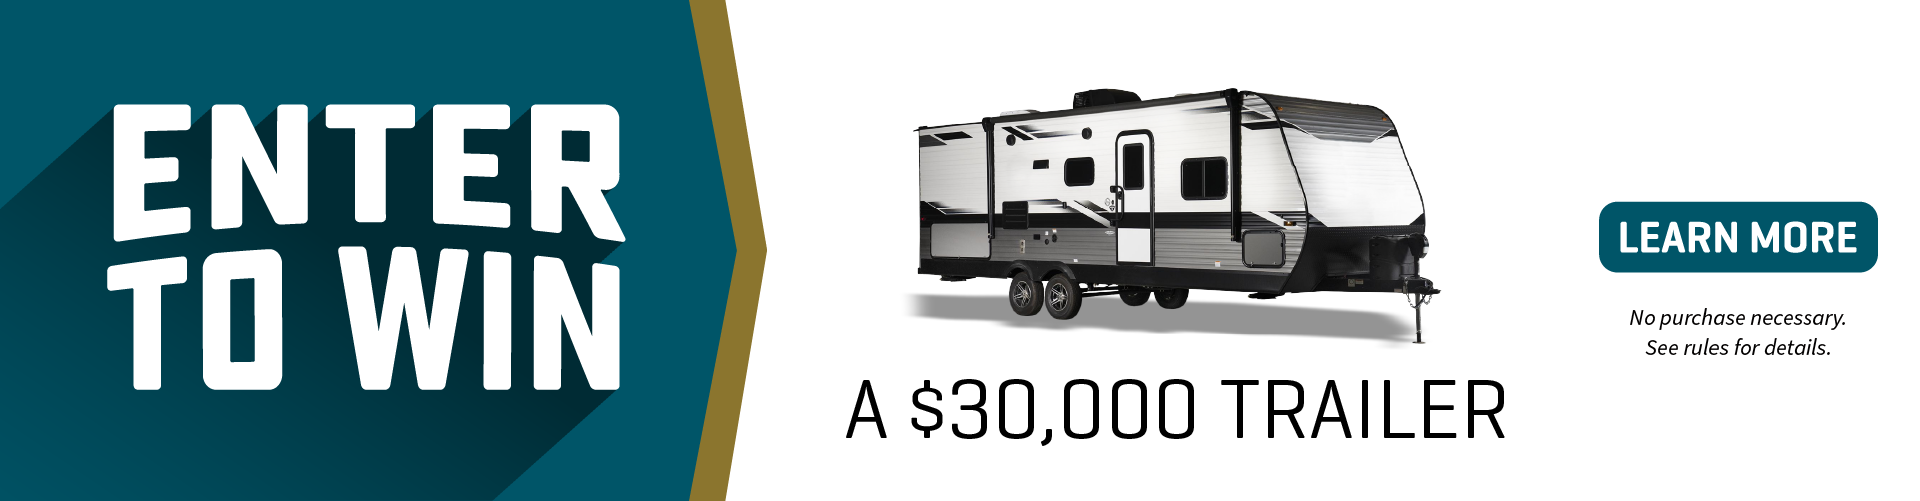 Enter to Win A Travel Trailer